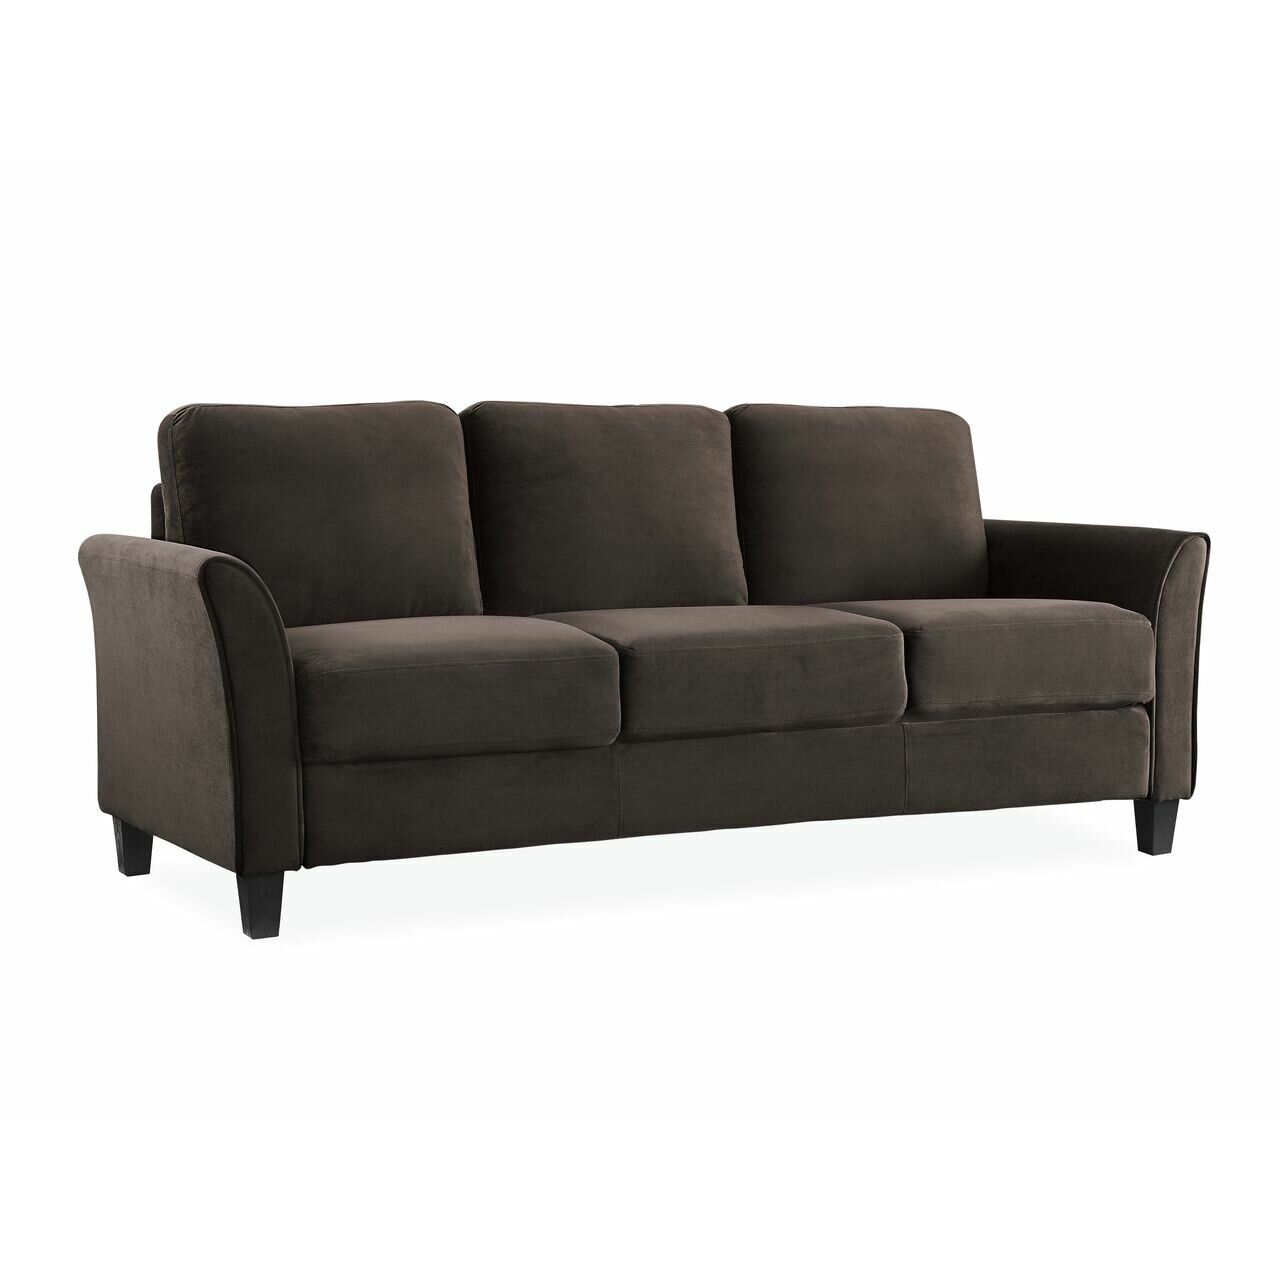 Charlton Home Patricia Curved Arm Sofa & Reviews | Wayfair Regarding Sofas With Curved Arms (Gallery 9 of 20)